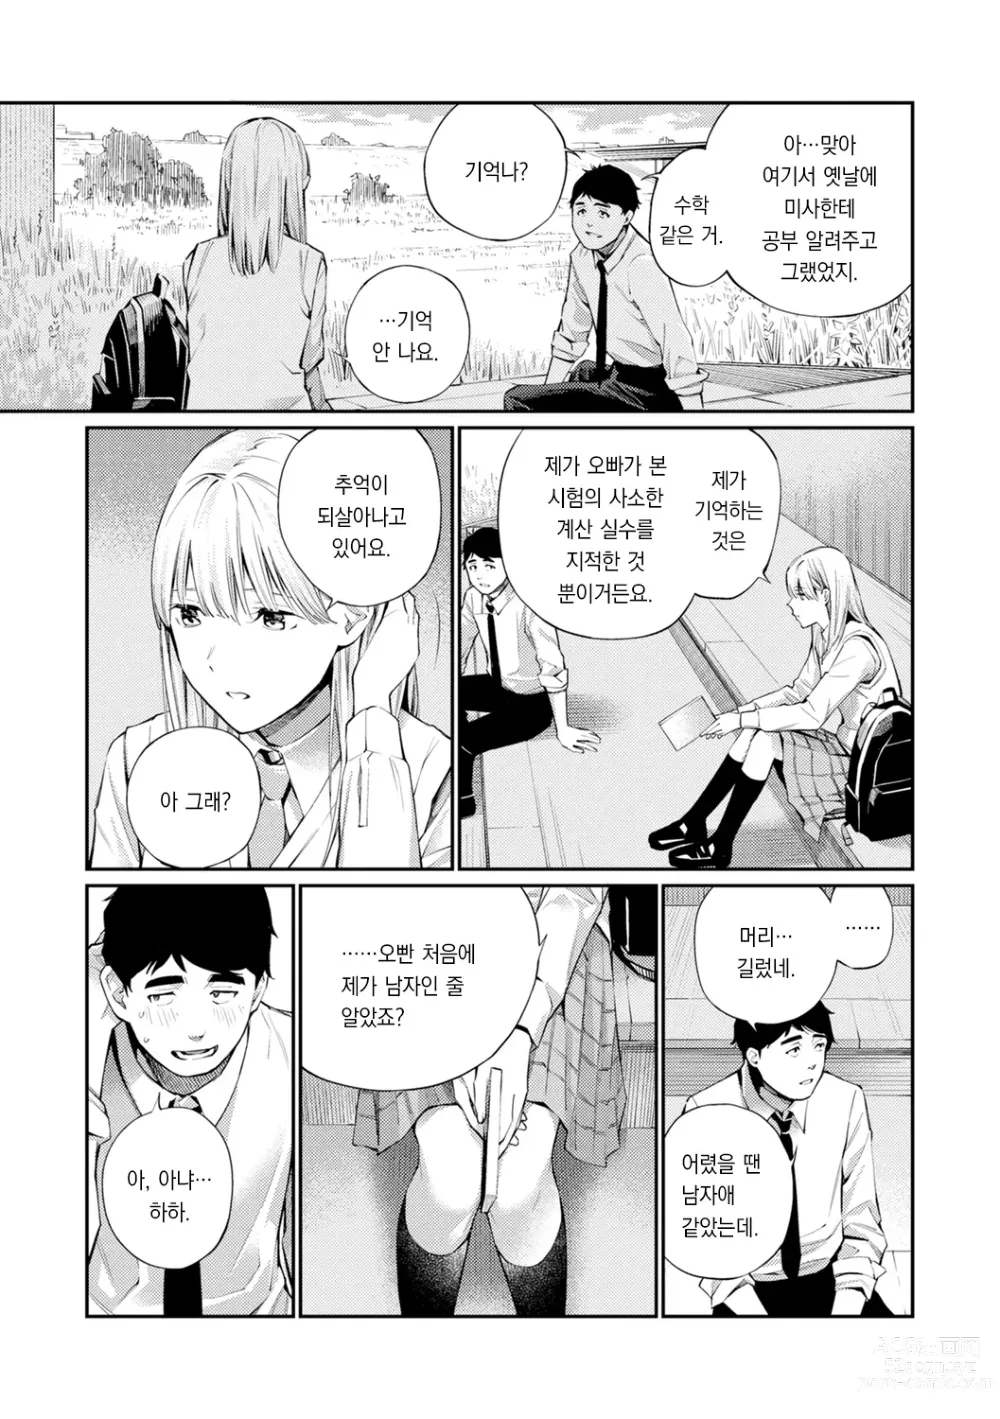 Page 9 of manga 비밀이에요. - Between You&ME